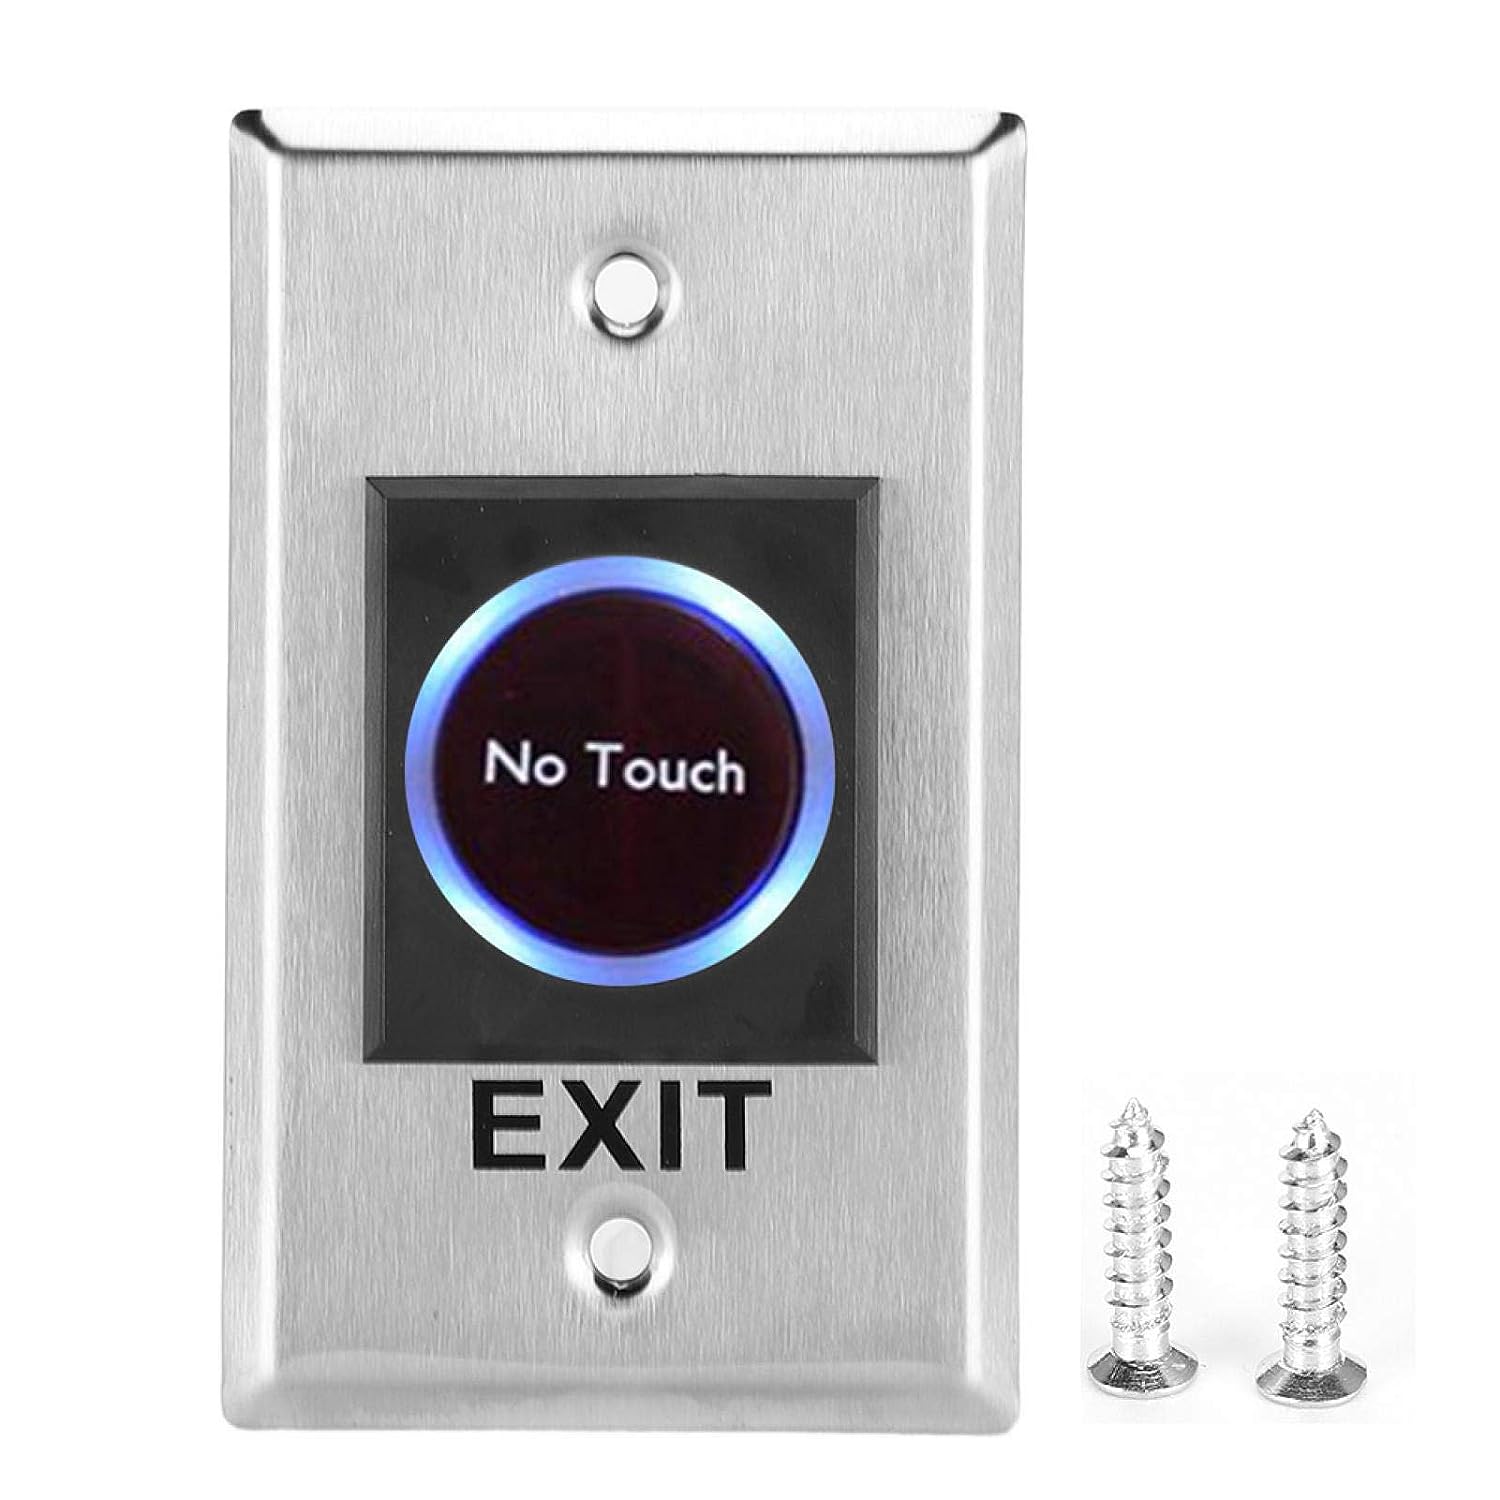 Exit Button Switch, DC12V Door Exit Button Sensor Switch Plexiglass Touch Trigger Contactless for Access Control System for Various Door Frames